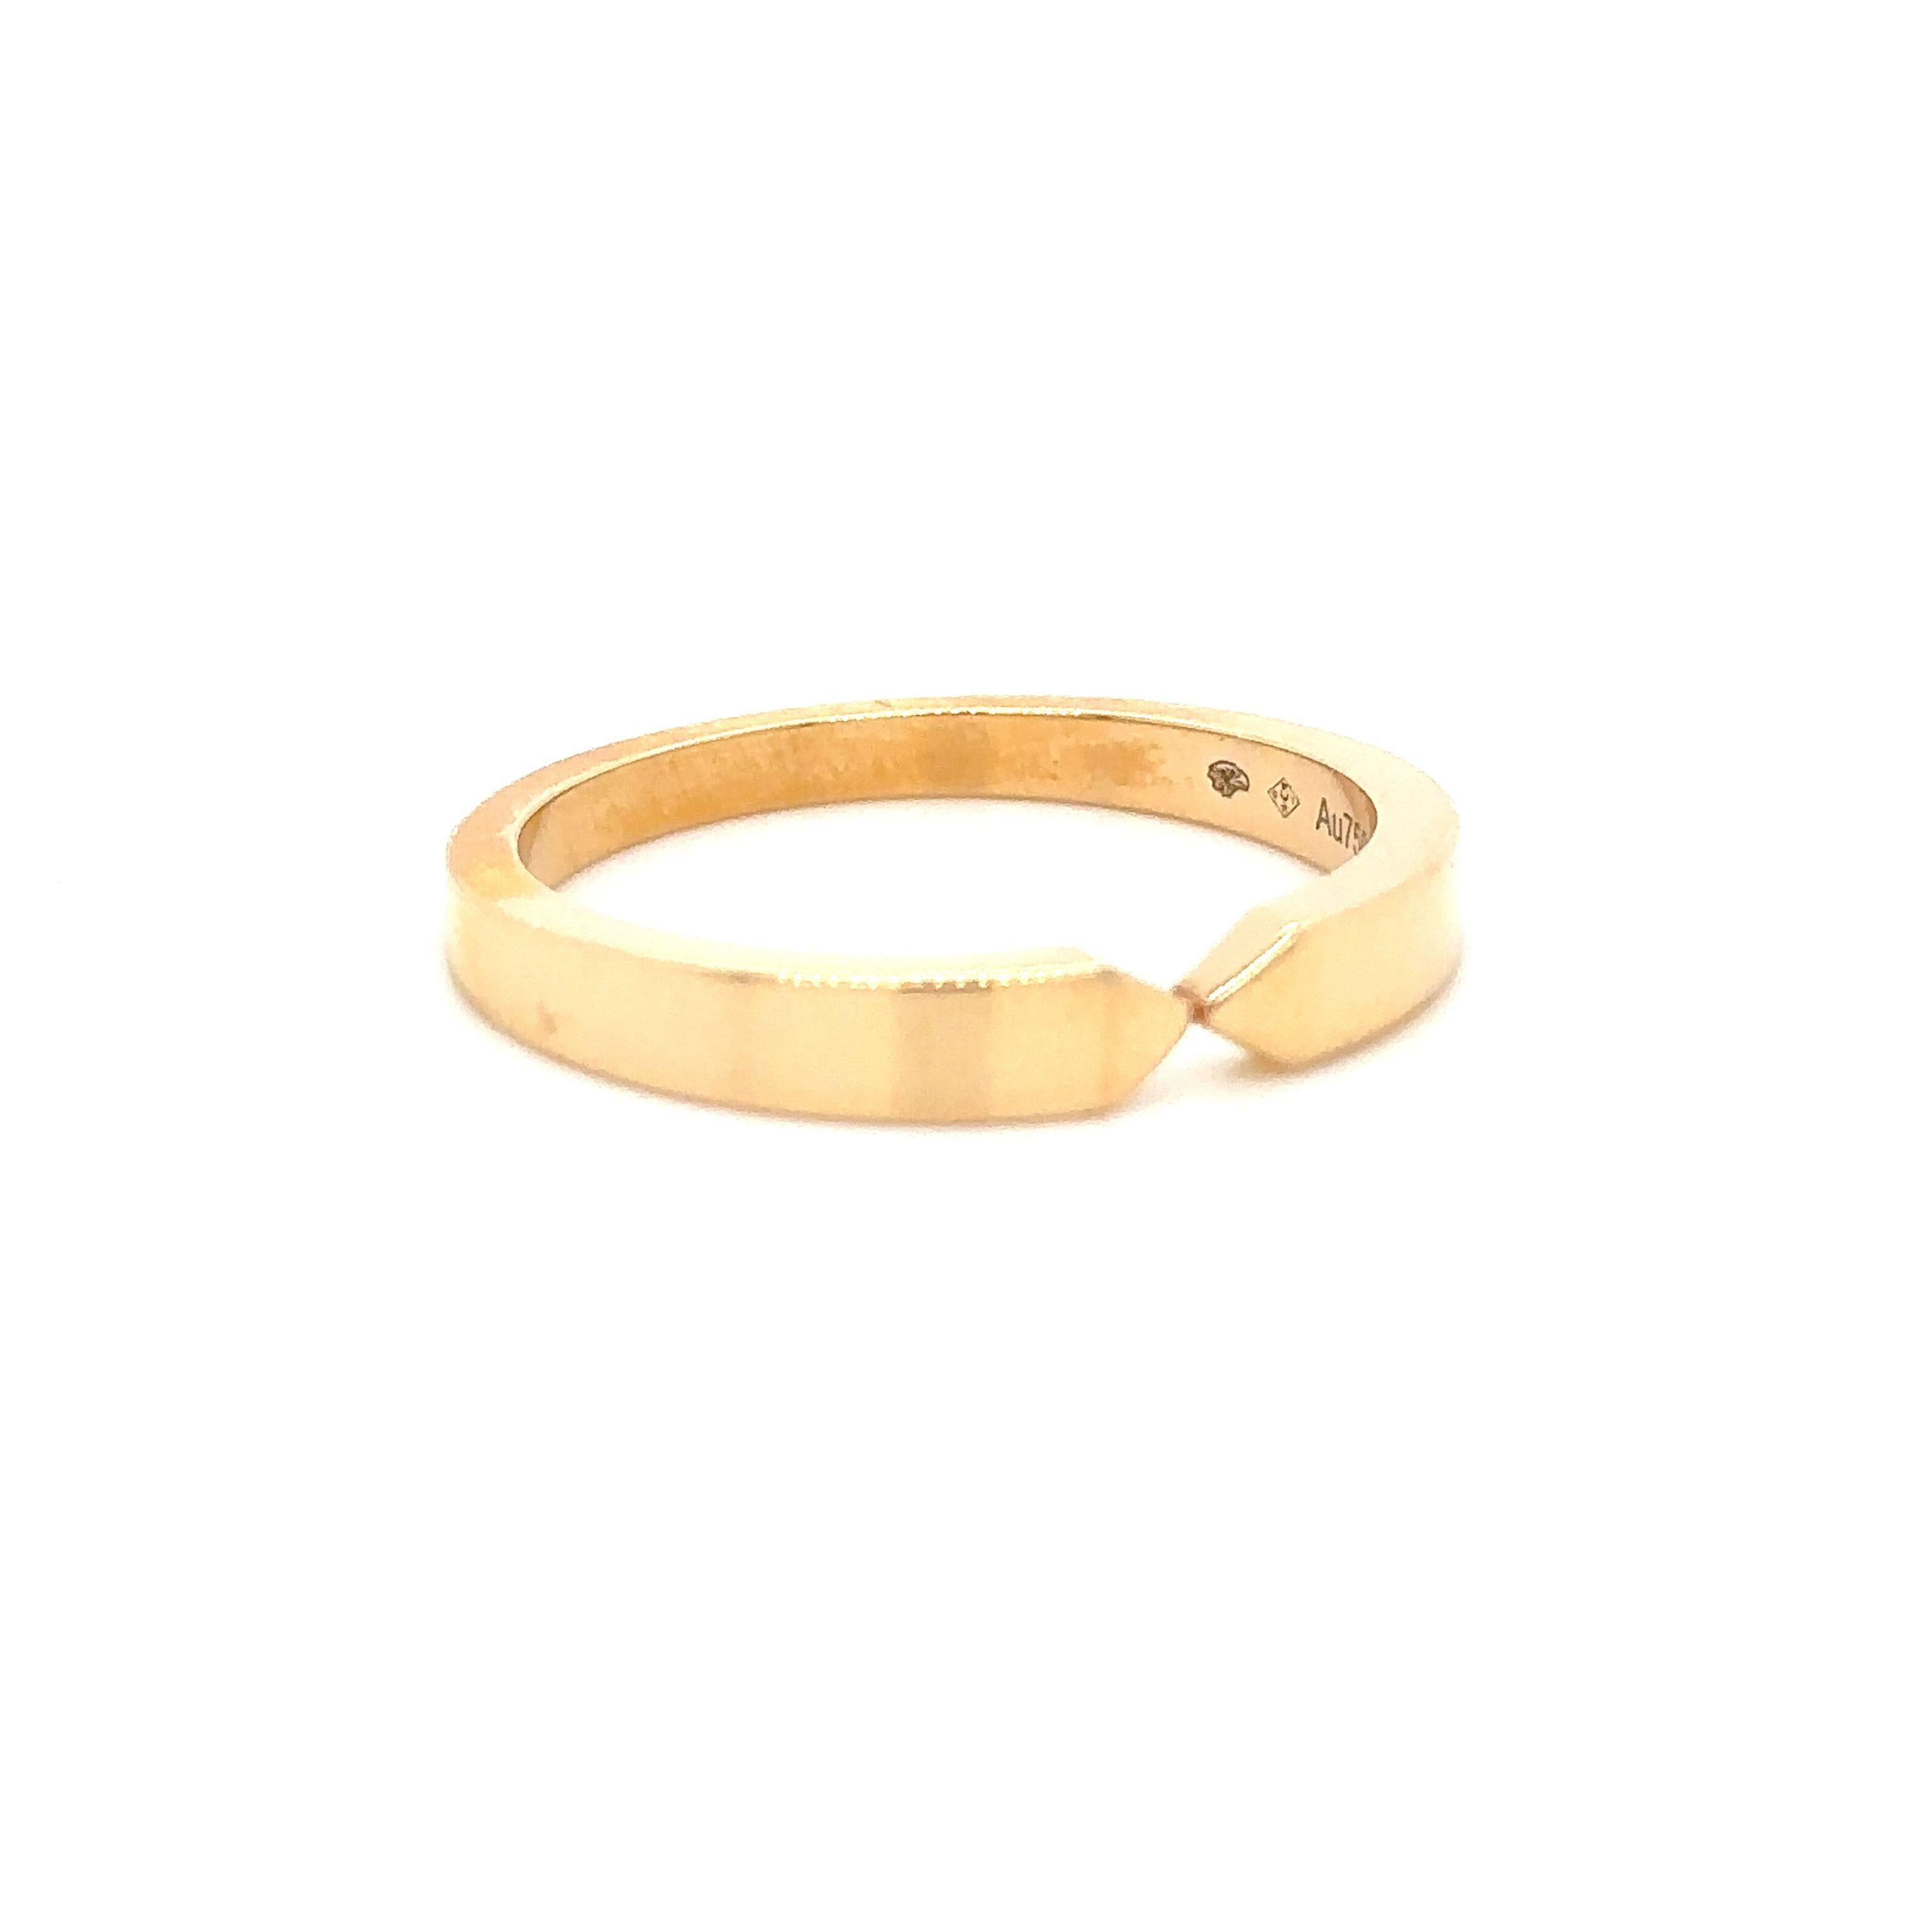 Unique features: 

Triomphe de Chaumet wedding band in rose gold.

Metal: 18ct Rose Gold
Carat: N/A
Colour: N/A
Clarity:  N/A
Cut: N/A
Weight: N/A
Engravings/Markings: Au750

Size/Measurement: 3.5mm

Current Condition: Excellent - Consistent with